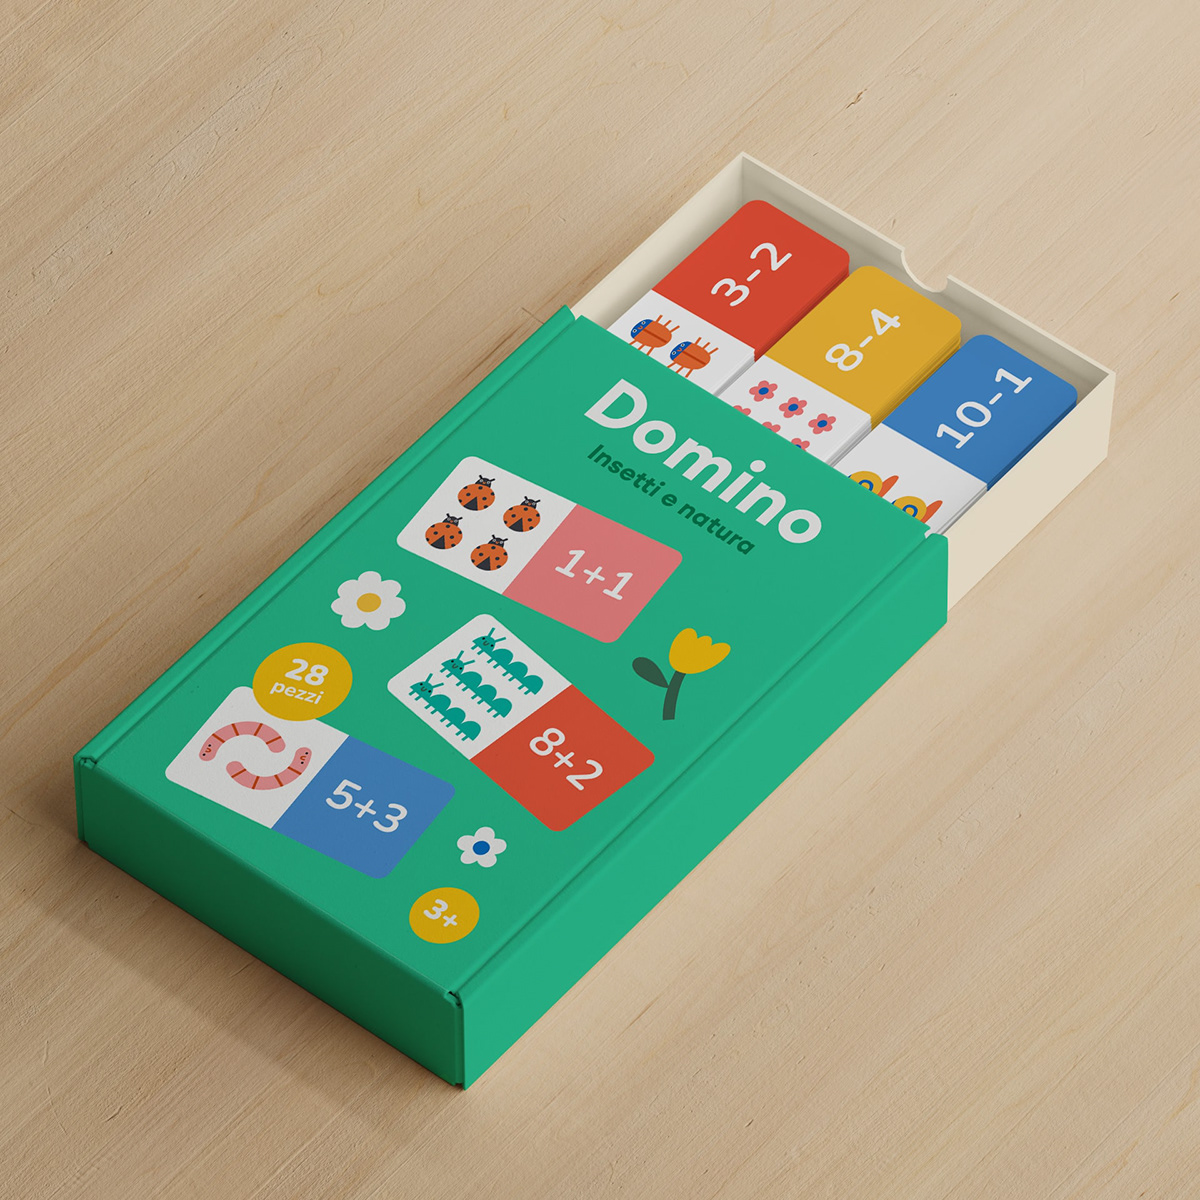 Domino game packaging design for kids